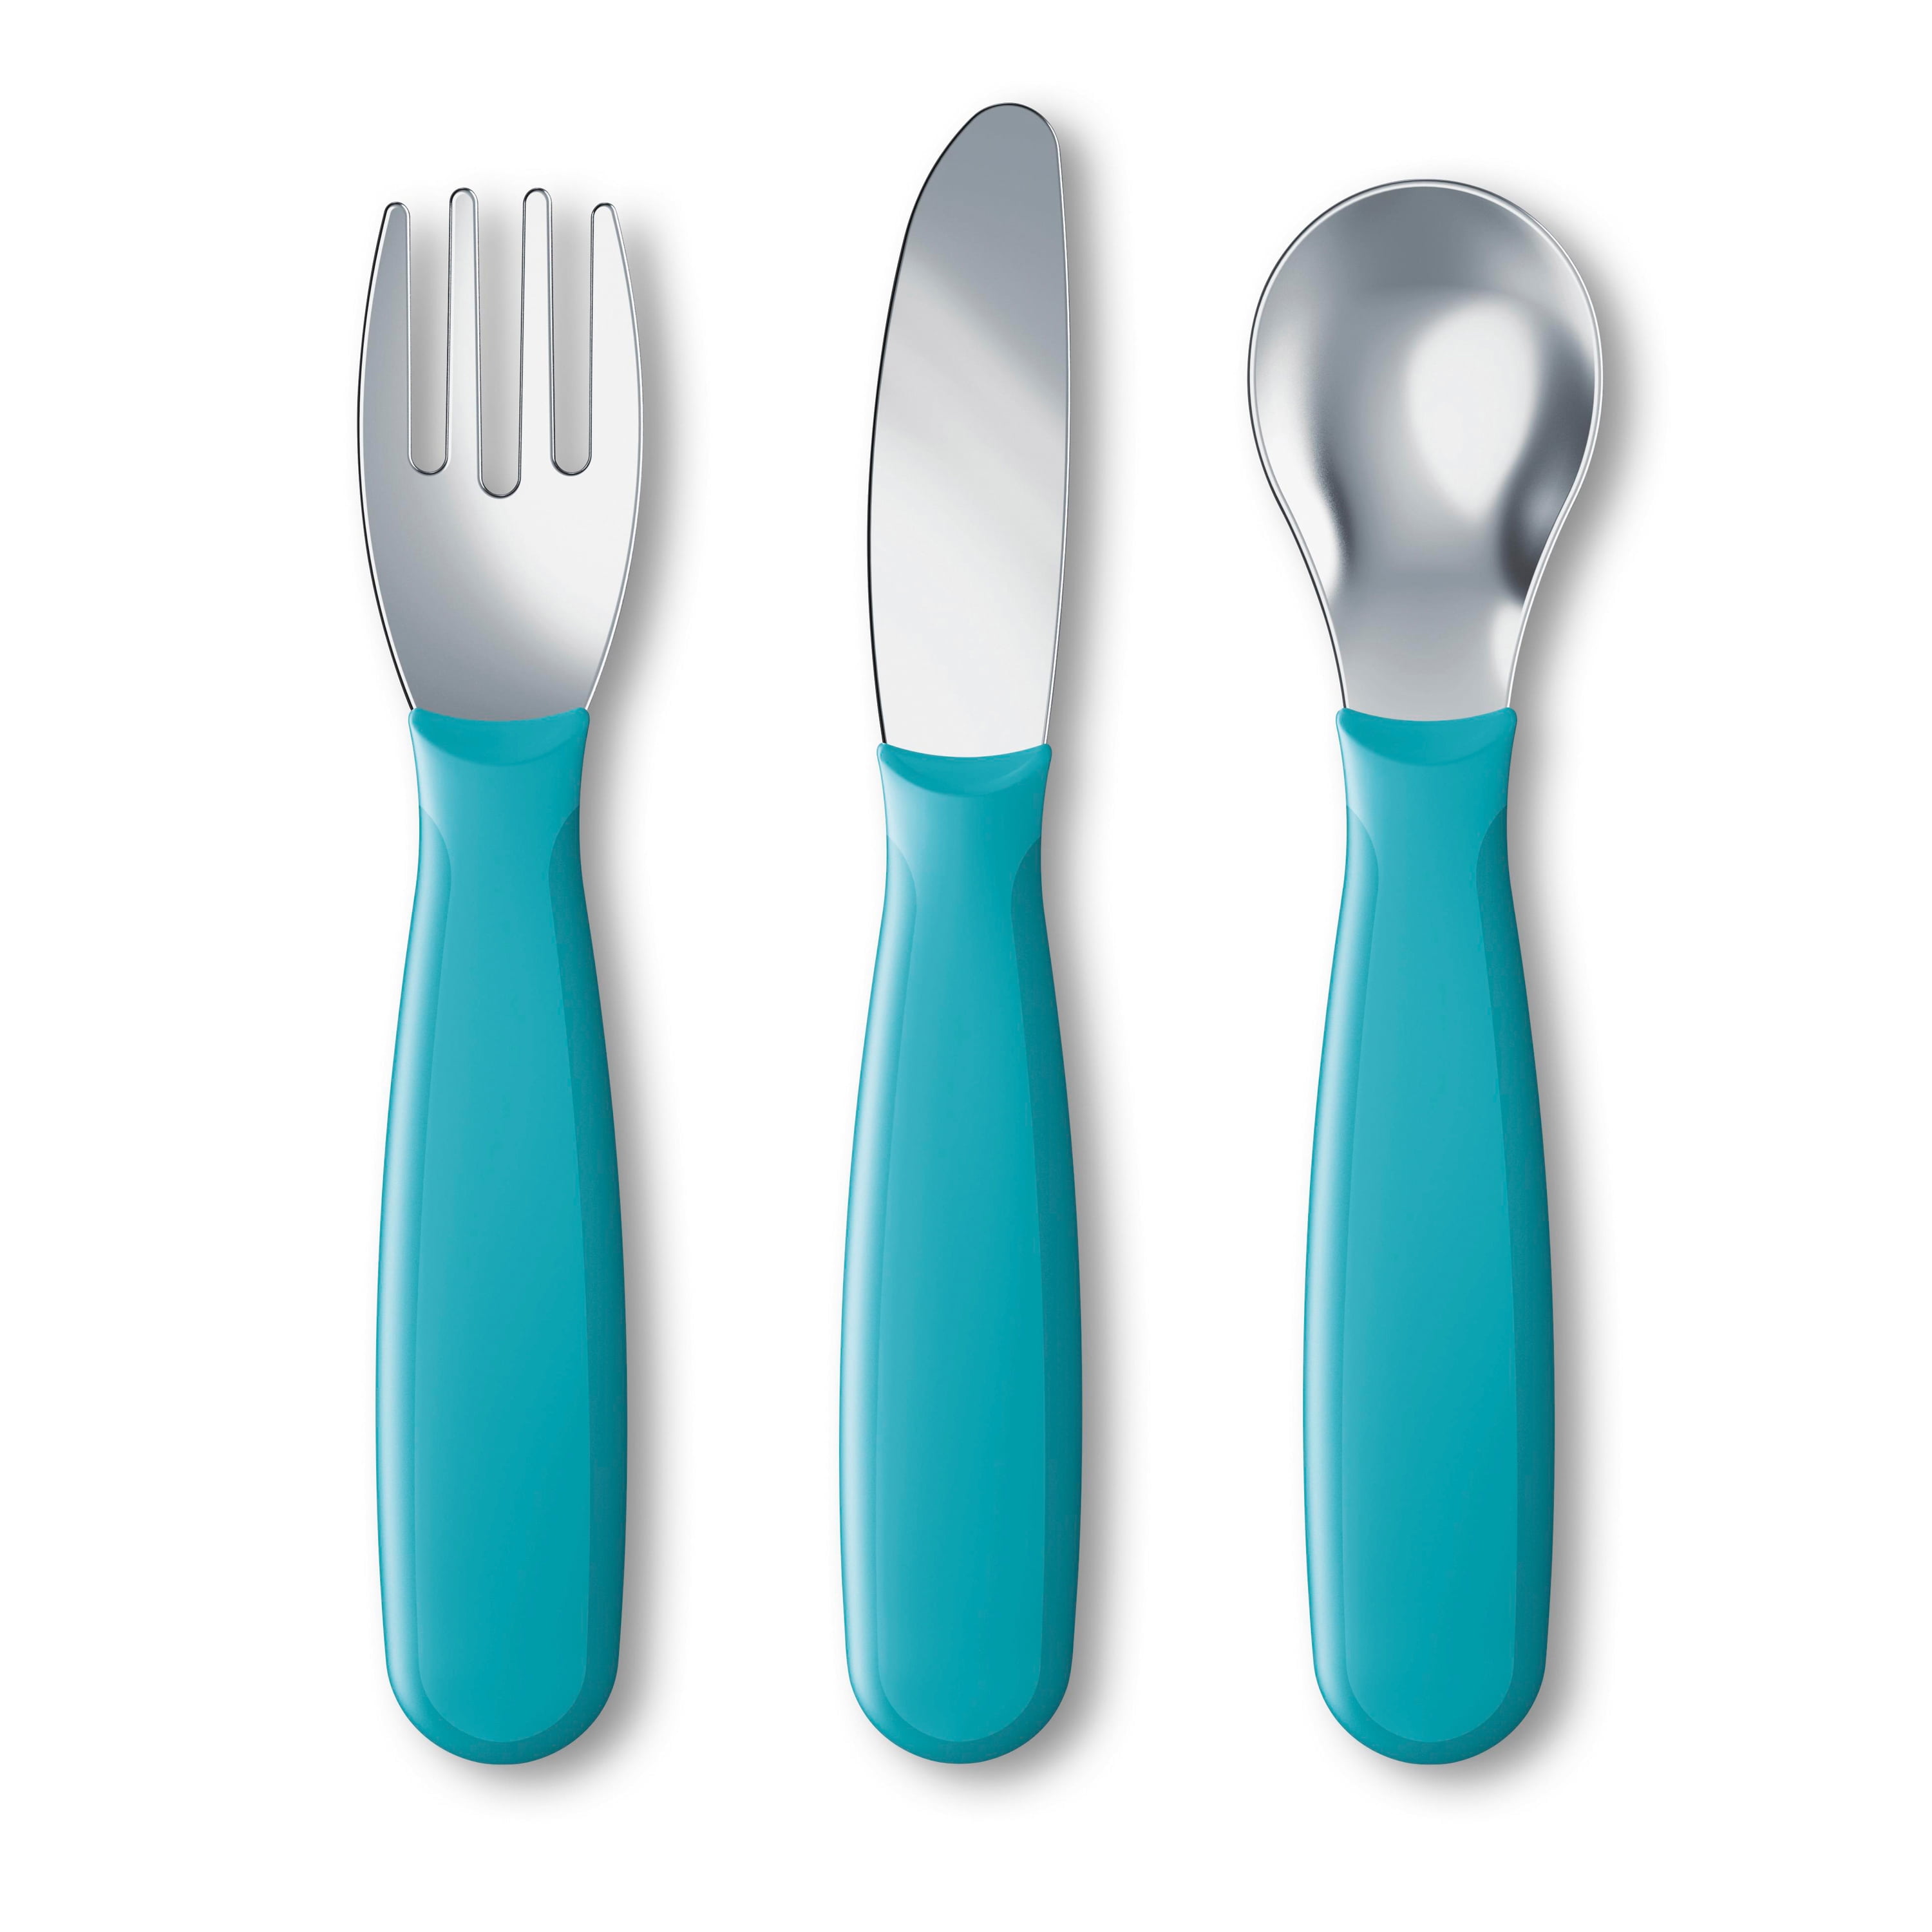 NUK Toddler Cutlery, Knife, Fork and Spoon Set, 3 Pack, Neutral